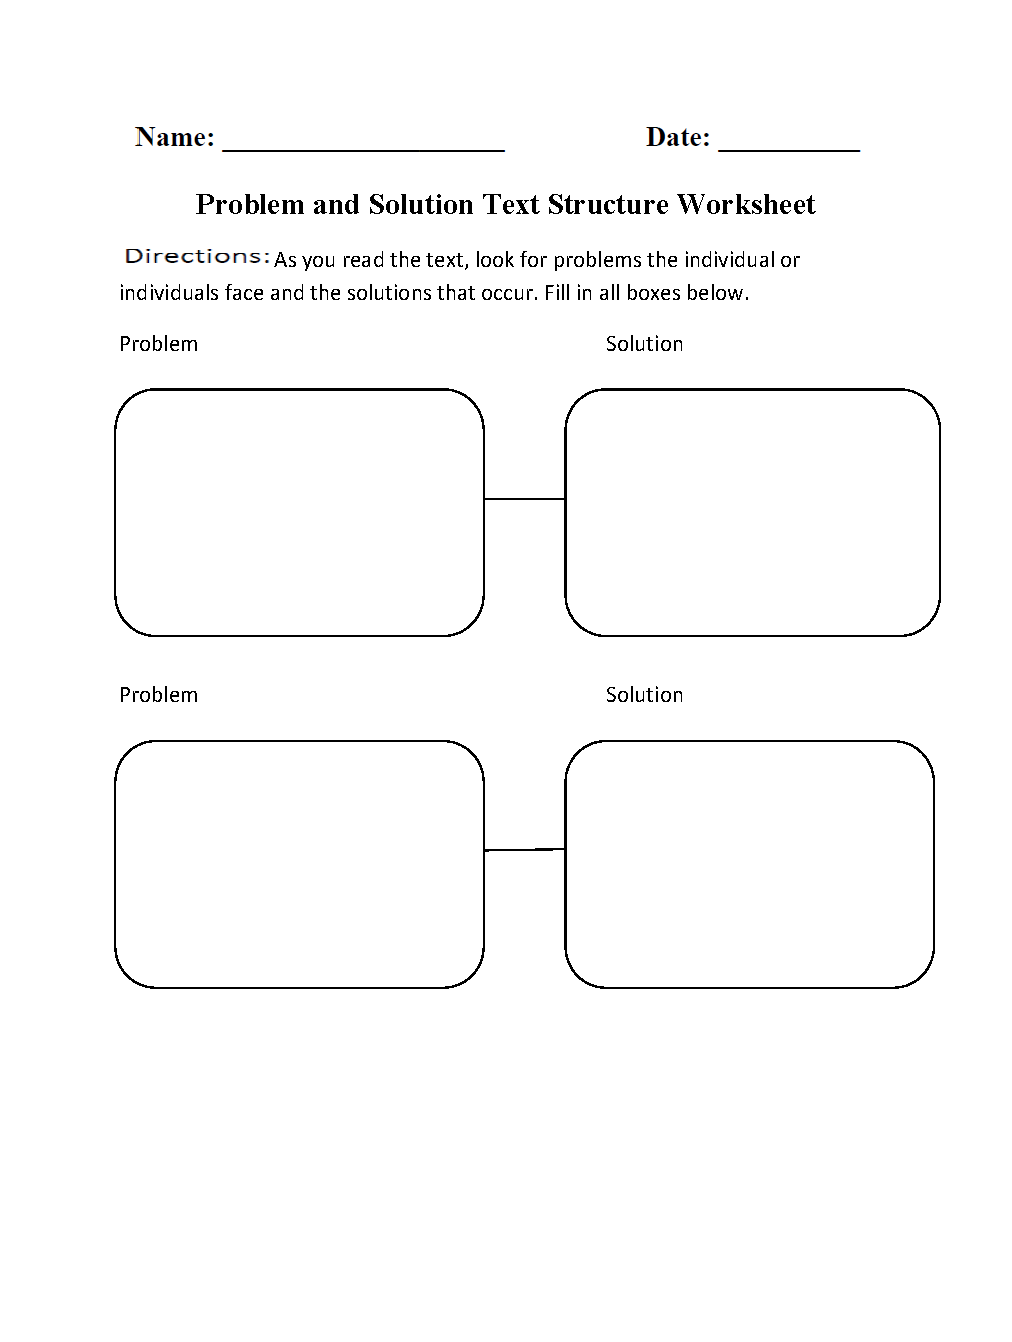 15 Best Images Of 7th Grade Pronouns Worksheets Pronouns And Antecedents Worksheets Cause And